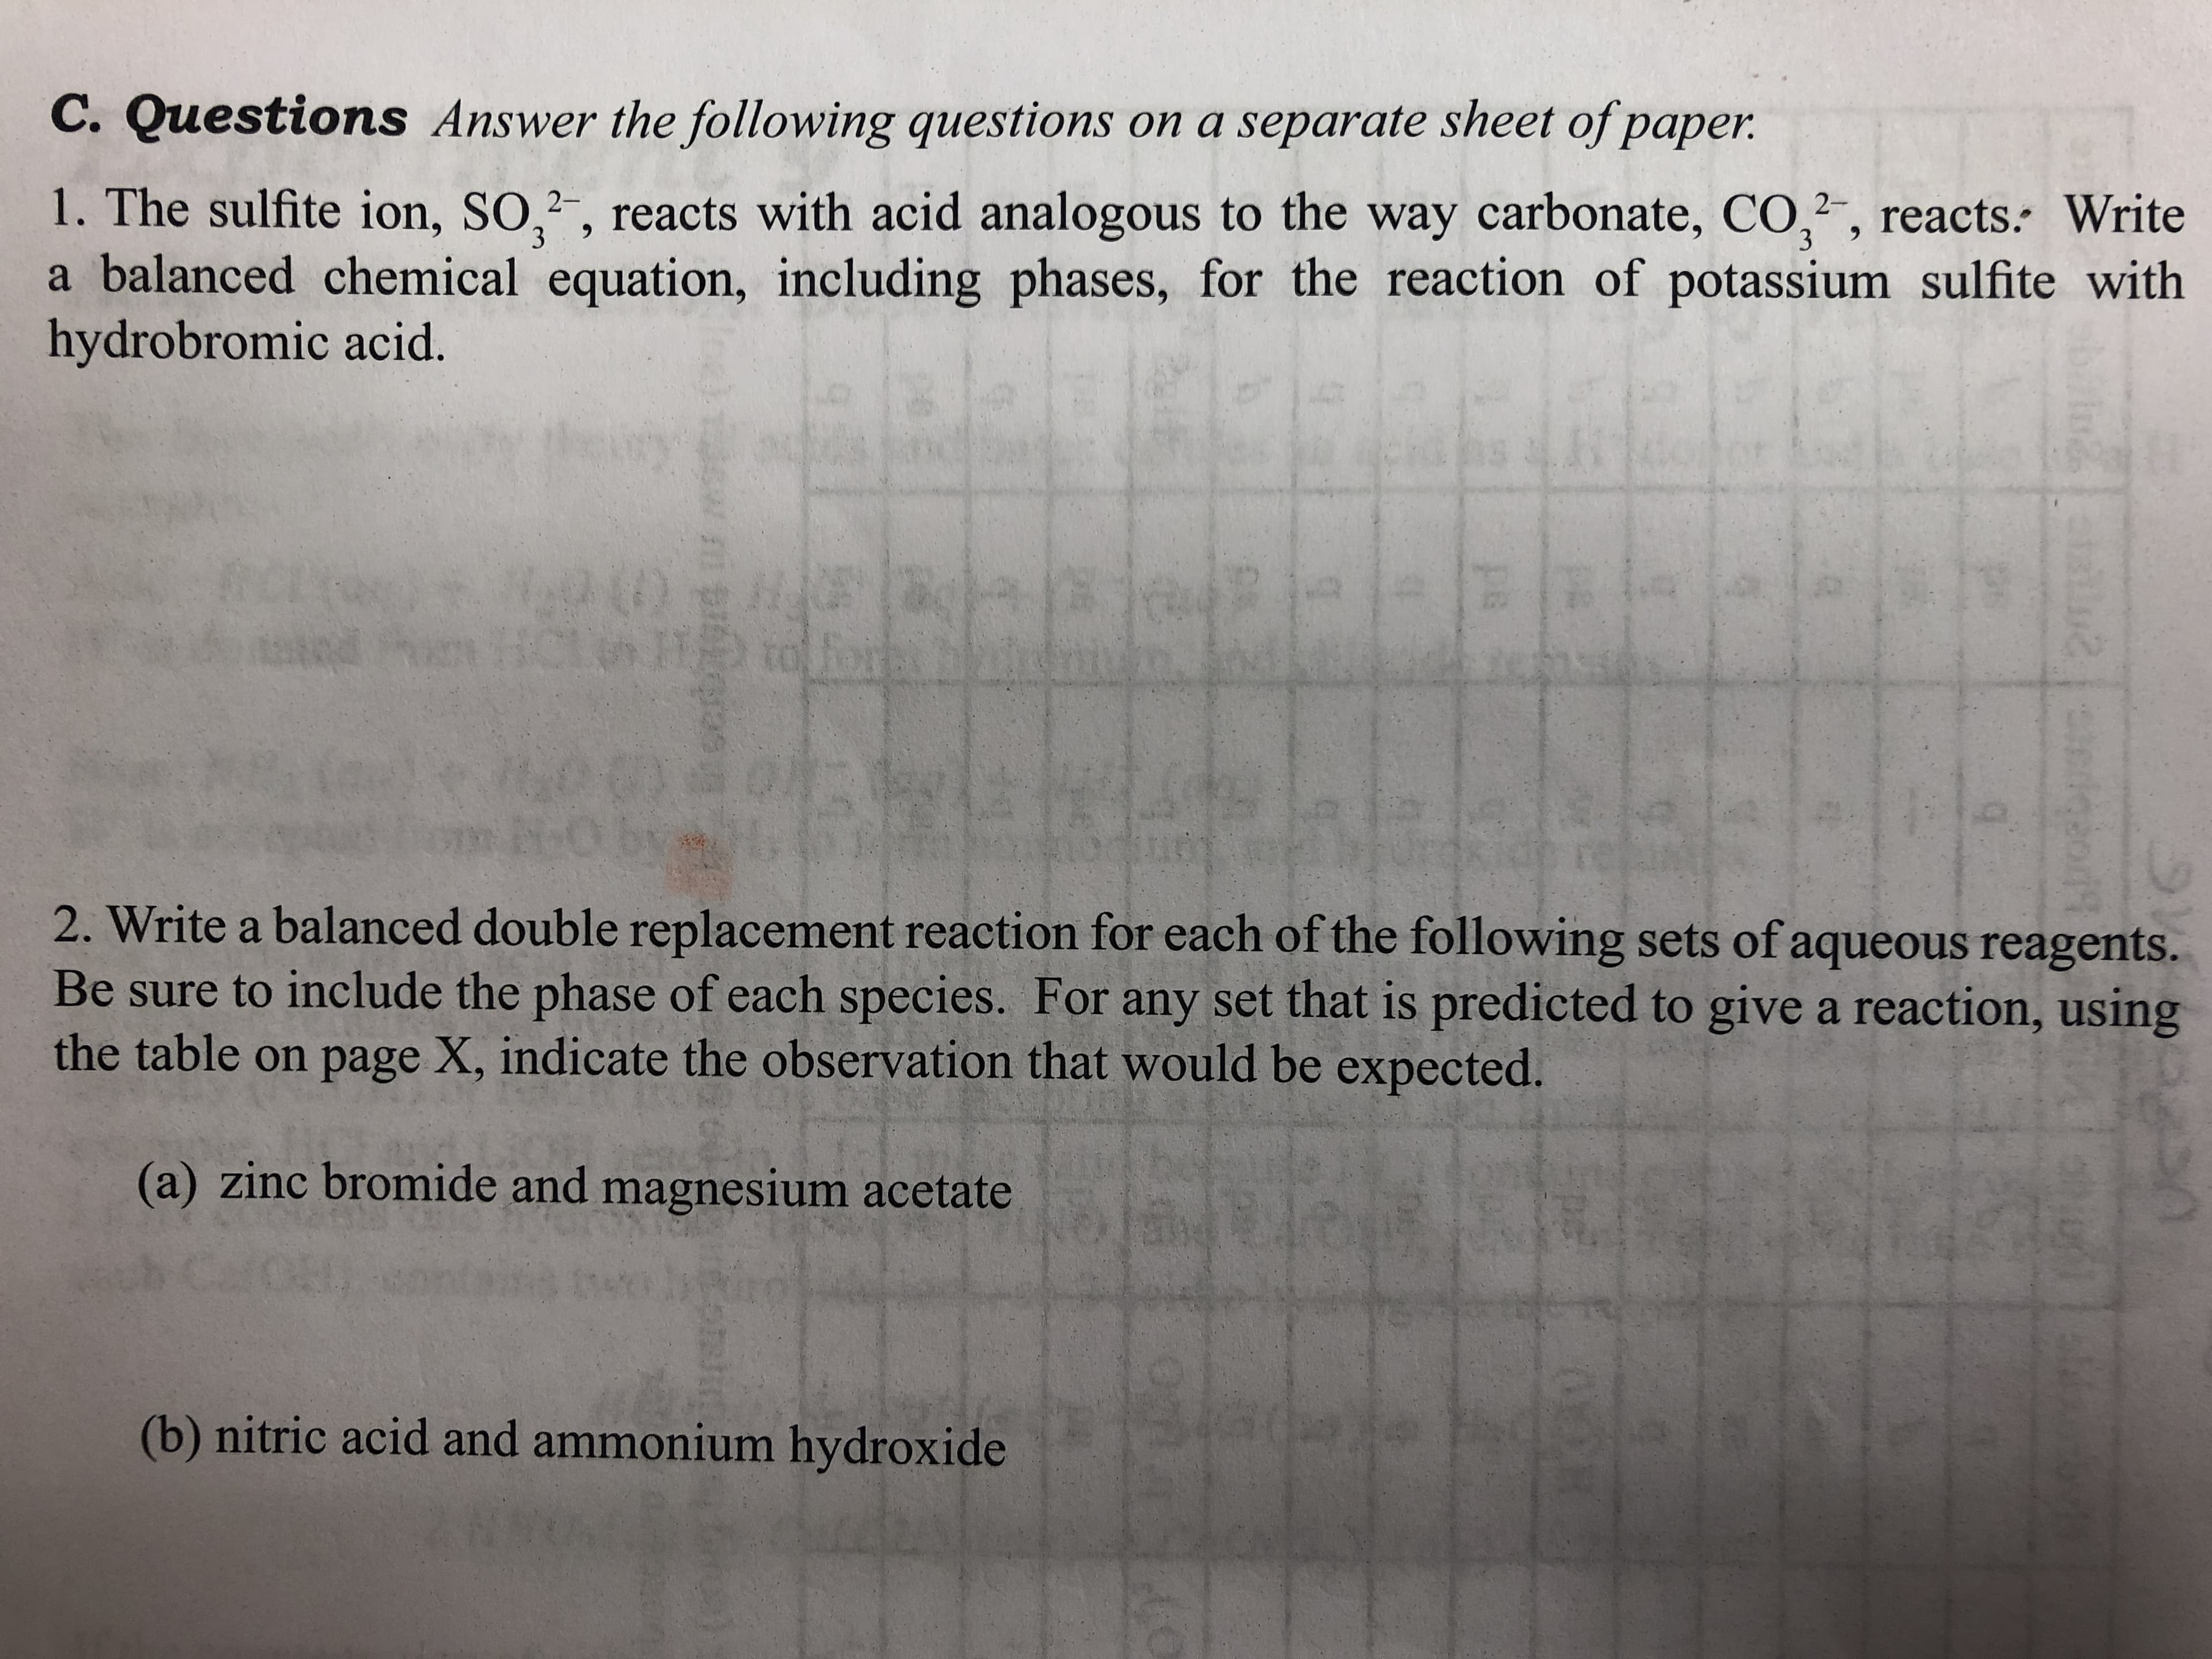 C. Questions Answer the following questions on a separate sheet of paper.
1. The sulfite ion, SO,, reacts with acid analogous to the way carbonate, CO,2",
a balanced chemical equation, including phases, for the reaction of potassium sulfite with
hydrobromic acid.
reacts. Write
3
as
to
2. Write a balanced double replacement reaction for each of the following sets of aqueous reagents.
Be sure to include the phase of each species. For any set that is predicted to give a reaction, using
the table on page X, indicate the observation that would be expected.
(a) zinc bromide and magnesium acetate
(b) nitric acid and ammonium hydroxide
